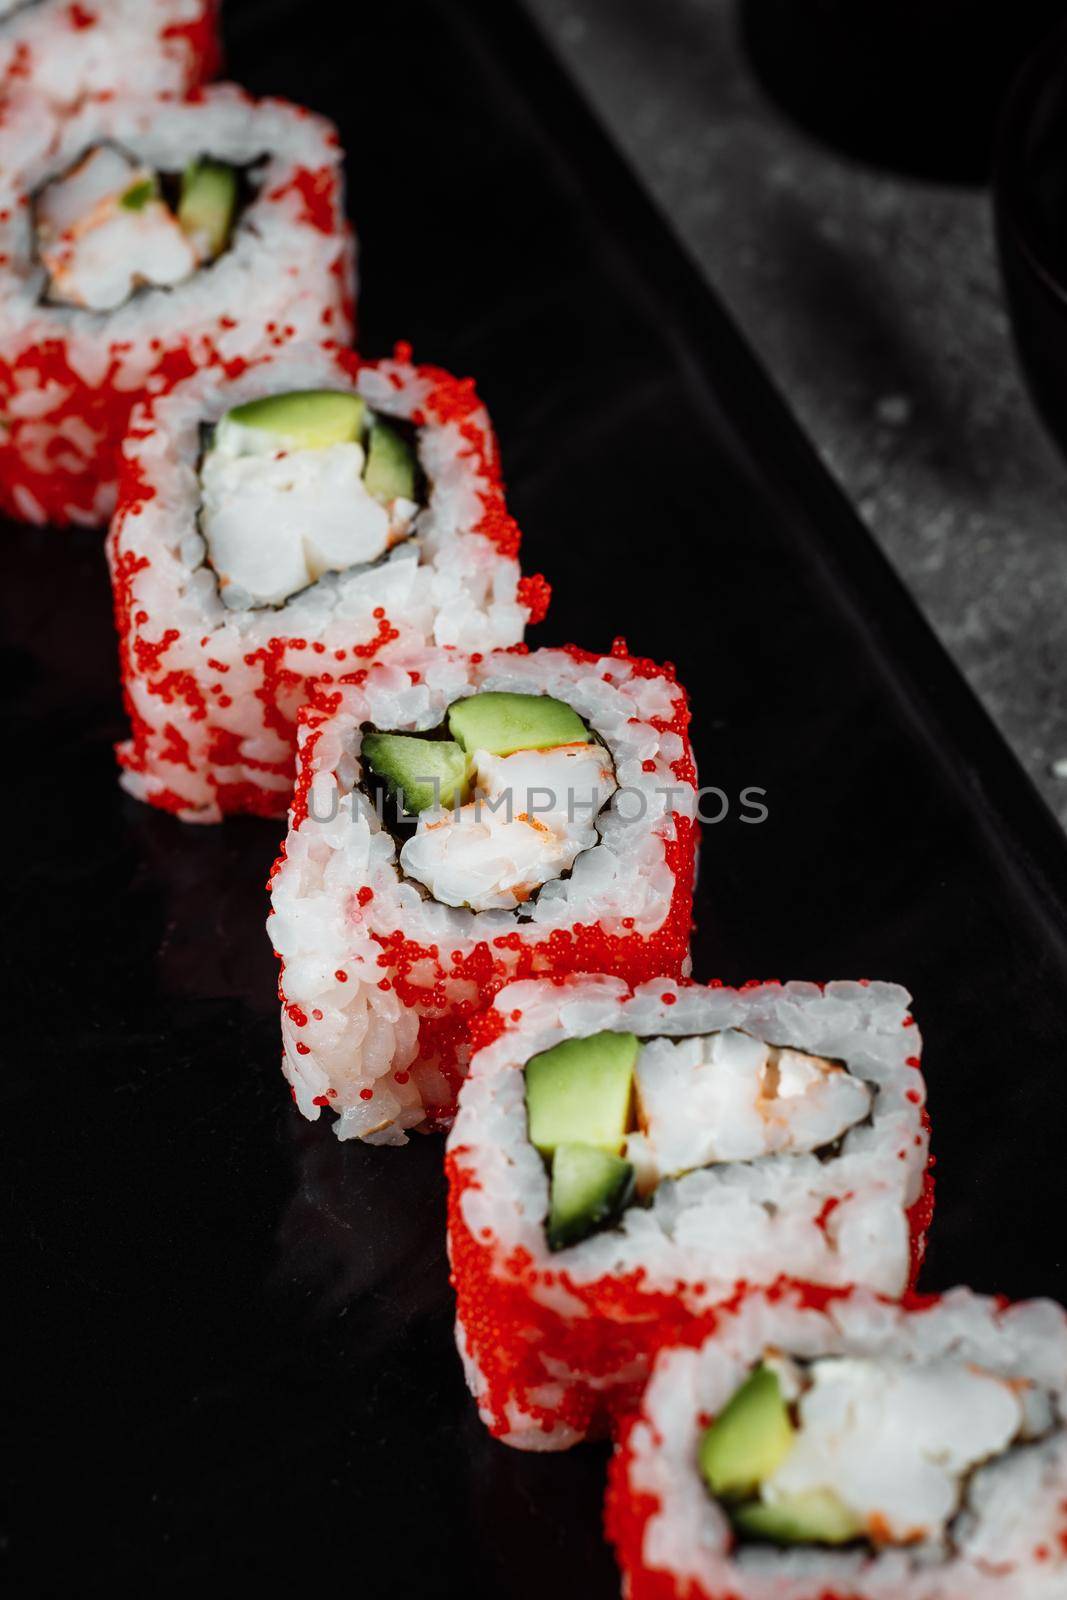 sushi roll california with shrimp, avocado and cheese. Traditional japanese sushi.